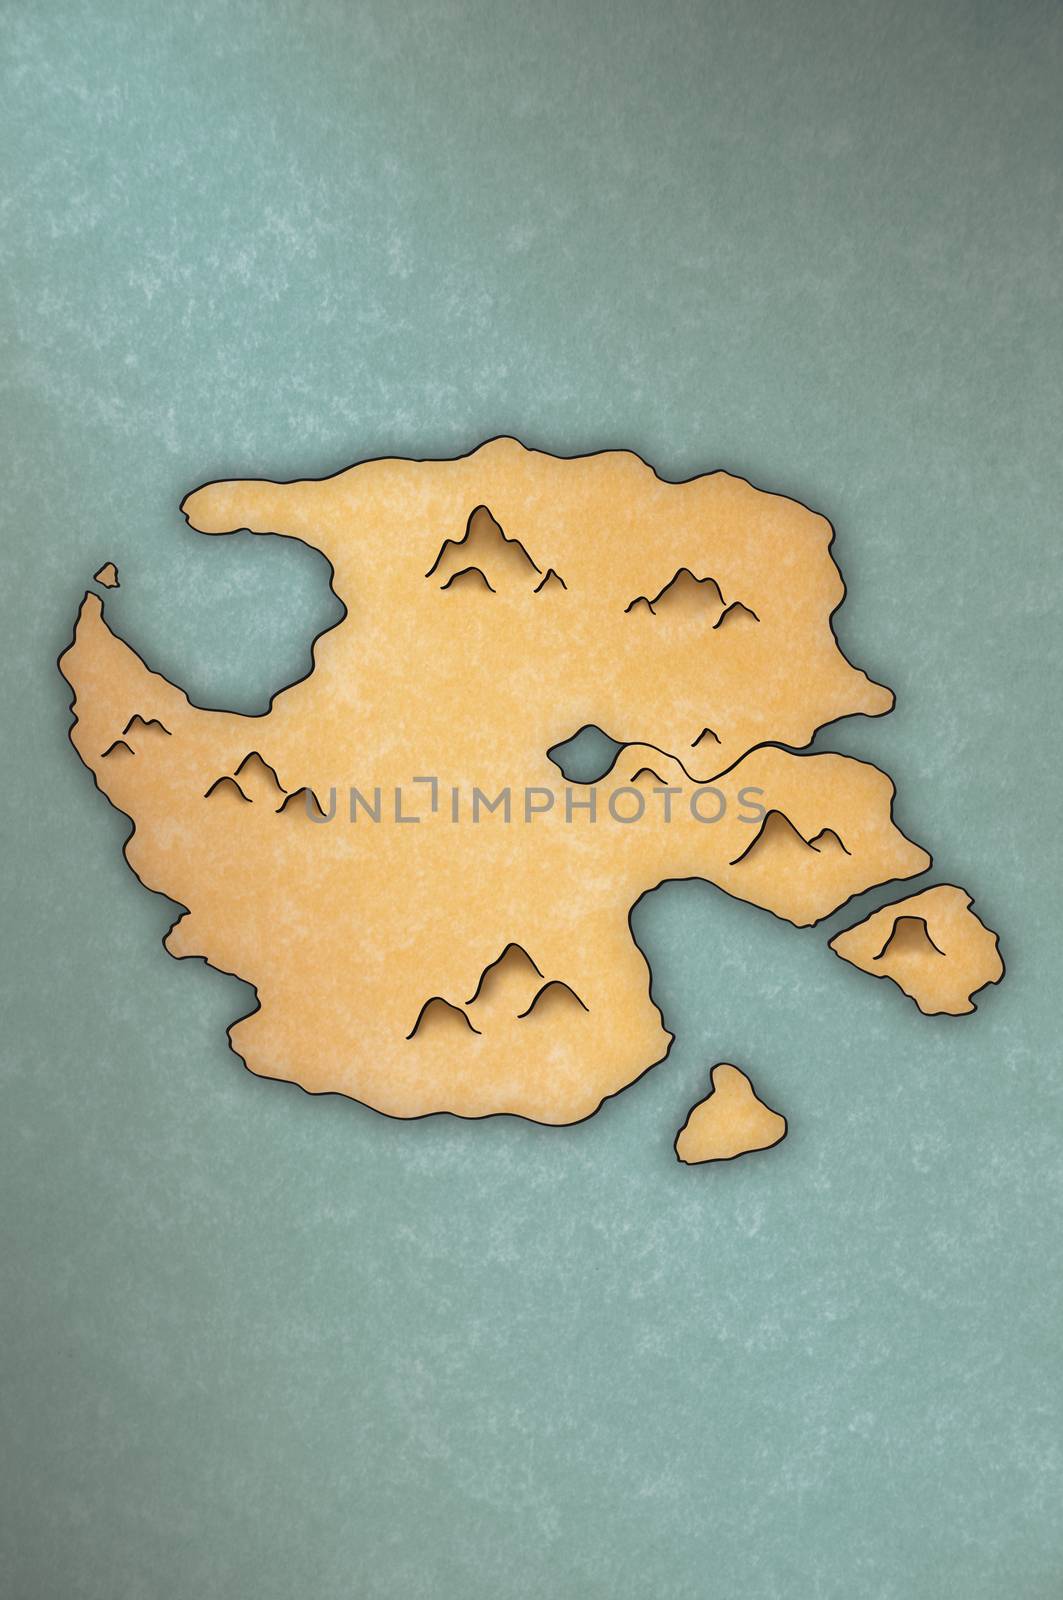 Antique-looking map of an island by Balefire9